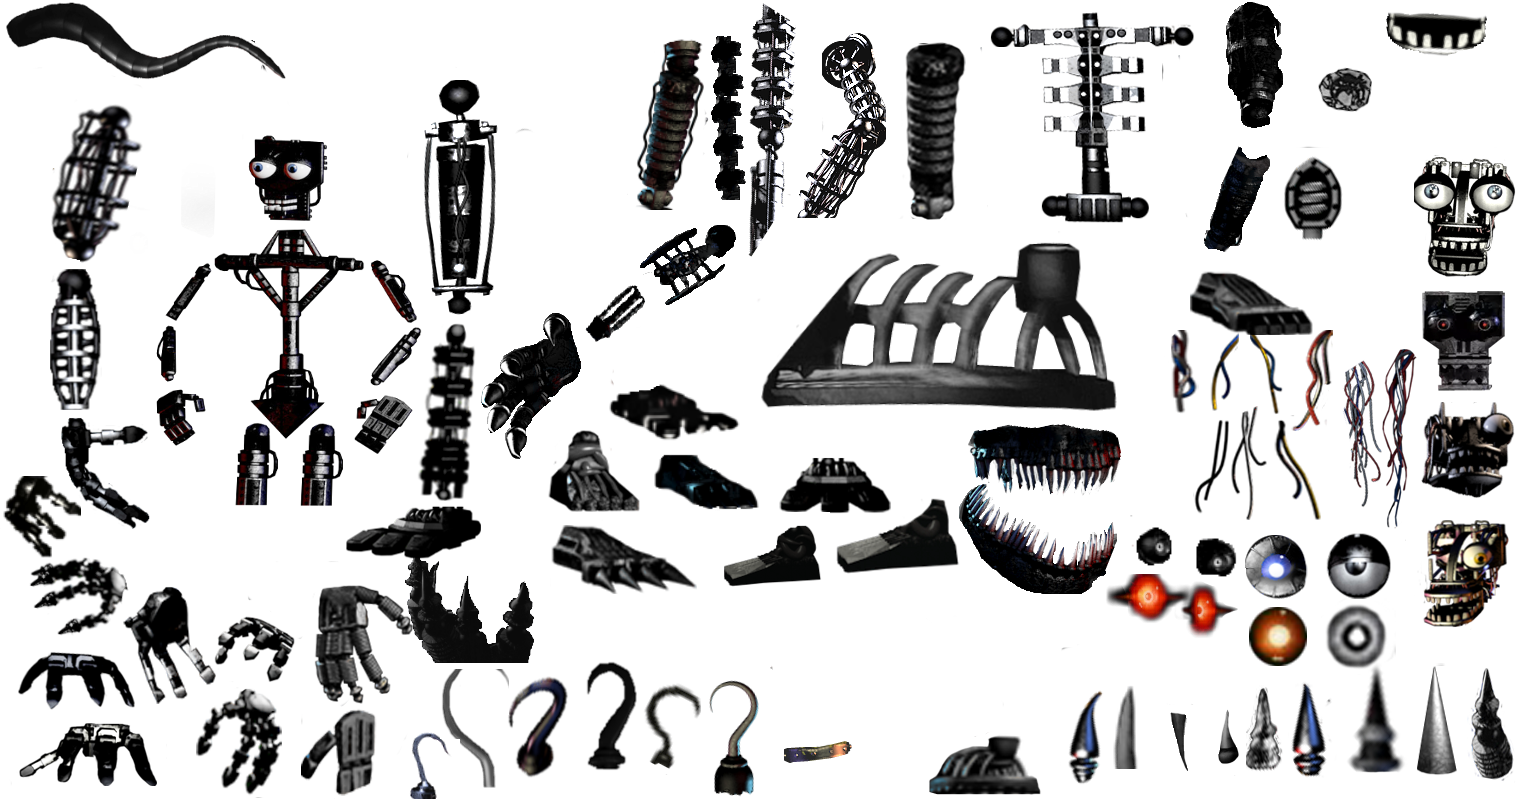 This visual is about animatronic freetoedit #animatronic parts.